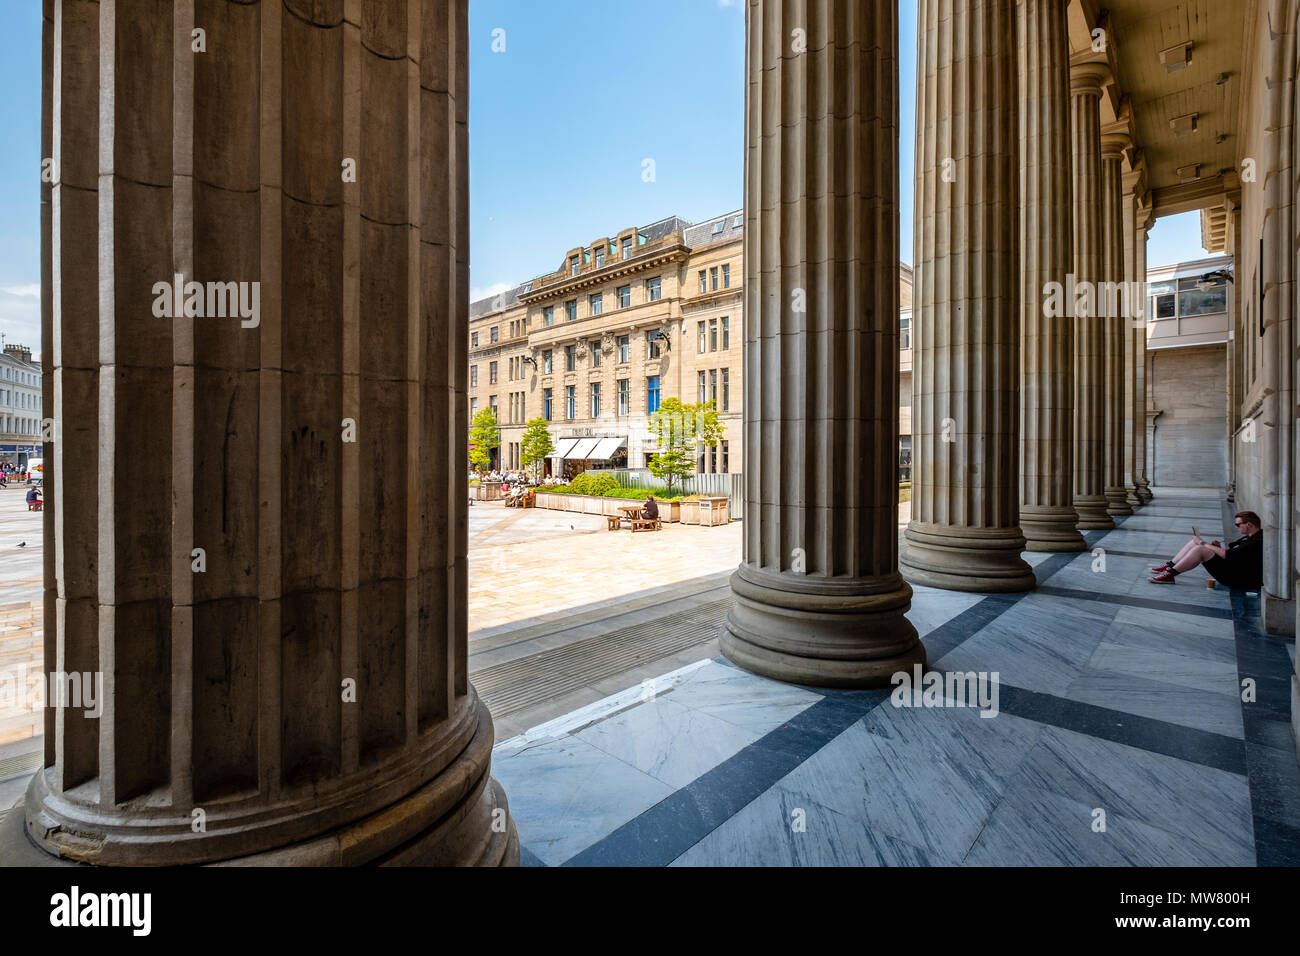 View of the City Square from Caird Hall, Dundee, Scotland, UK Stock Photo